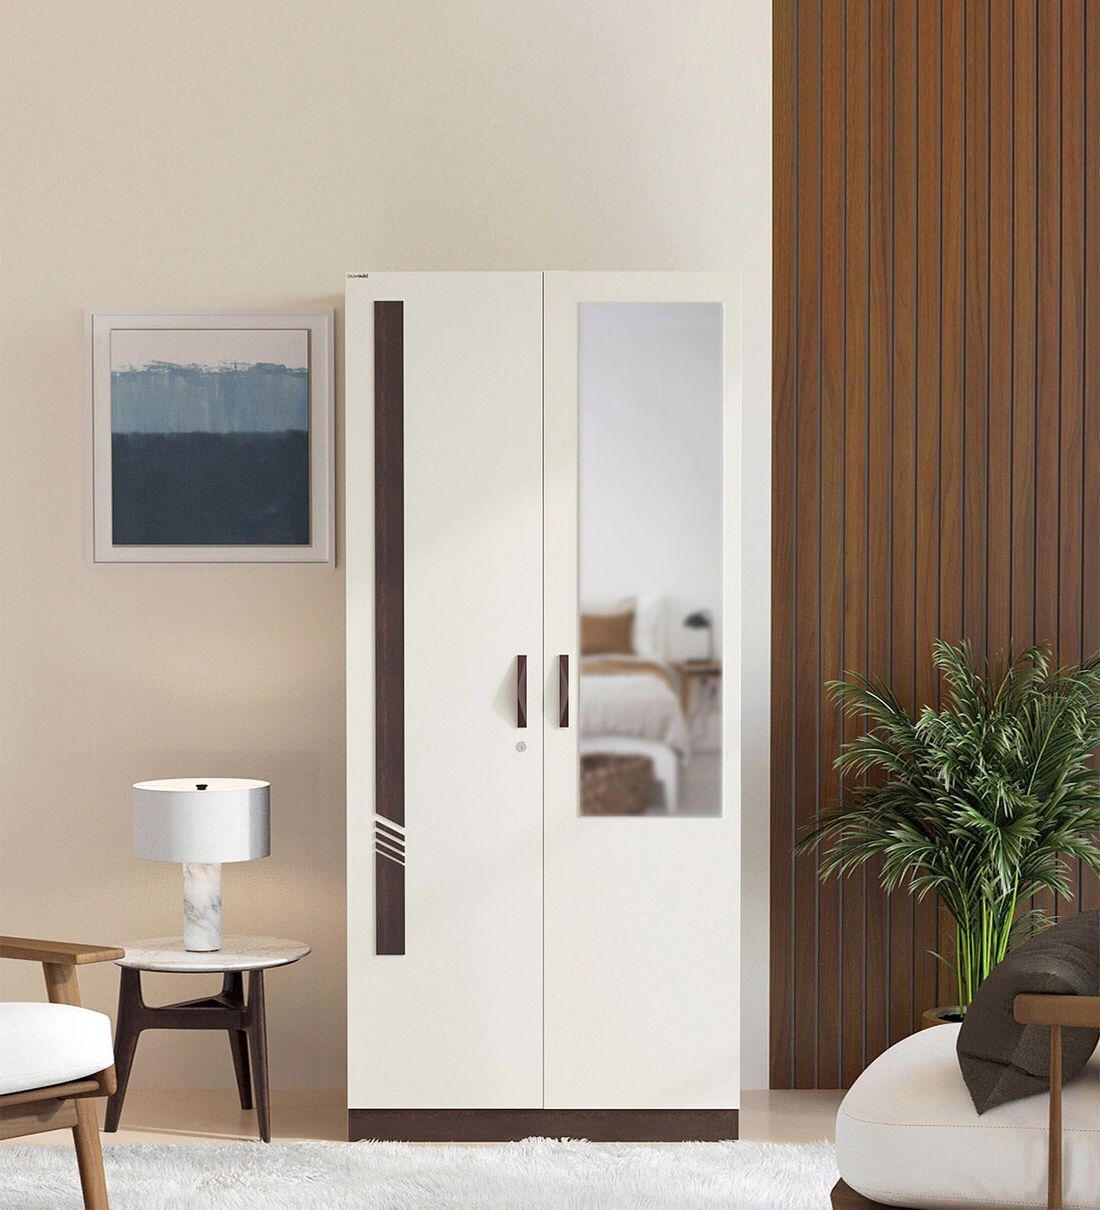 Buy Andrie 2 Door Wardrobe In Wenge & White Finish With Mirror At 26% Off Bluewud | Pepperfry Regarding Single White Wardrobes With Mirror (View 11 of 20)